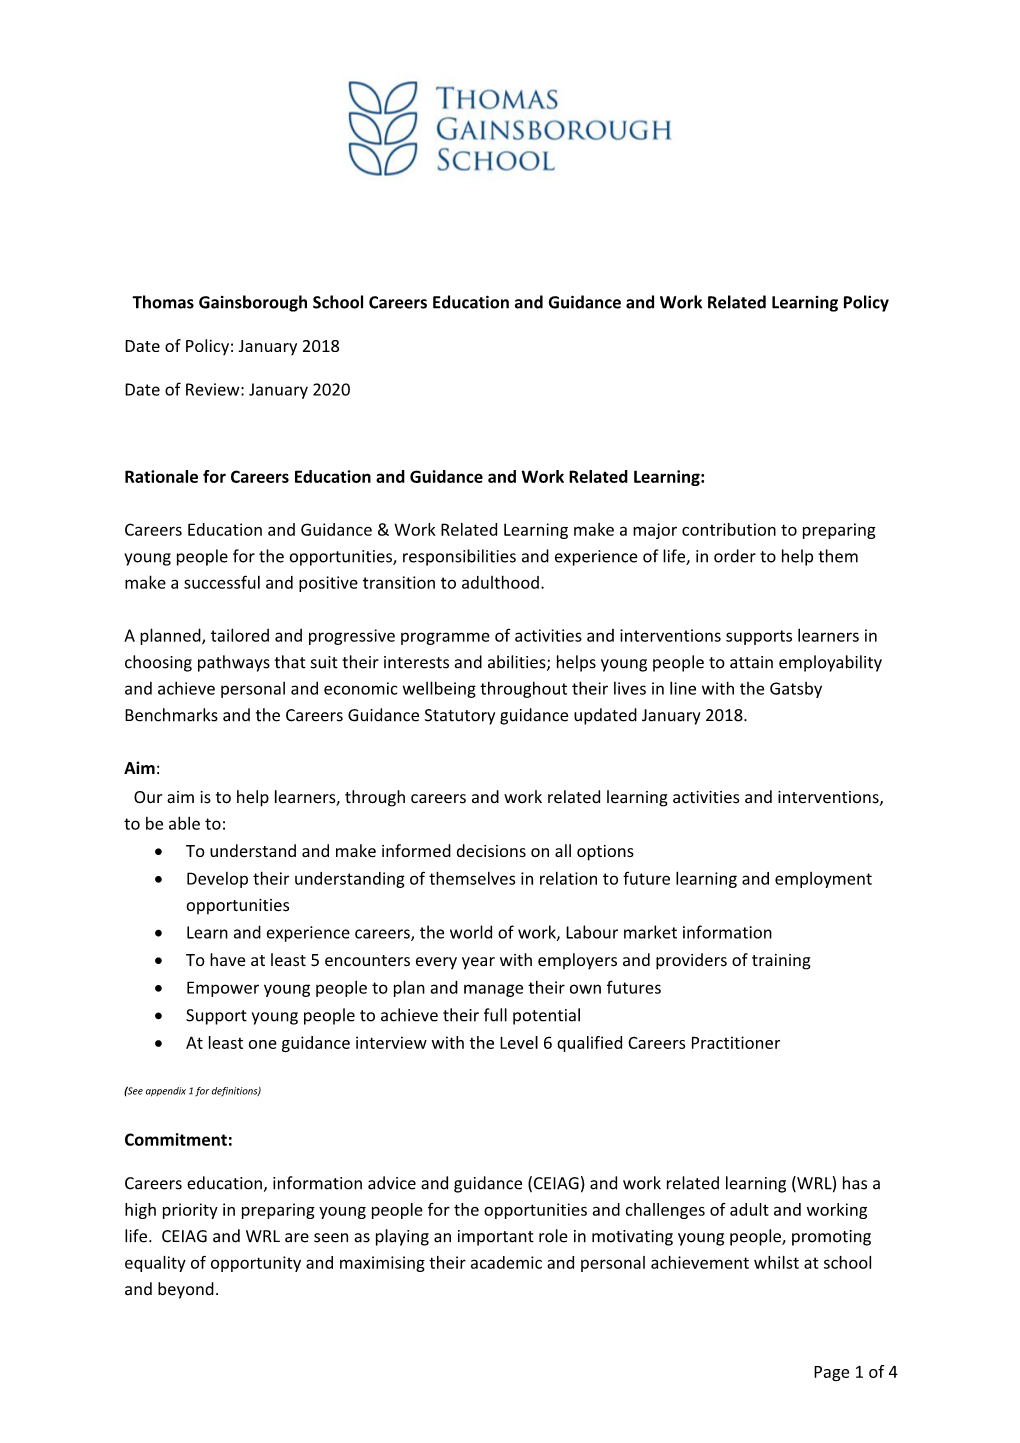 Thomas Gainsborough School Careers Education and Guidance and Work Related Learning Policy